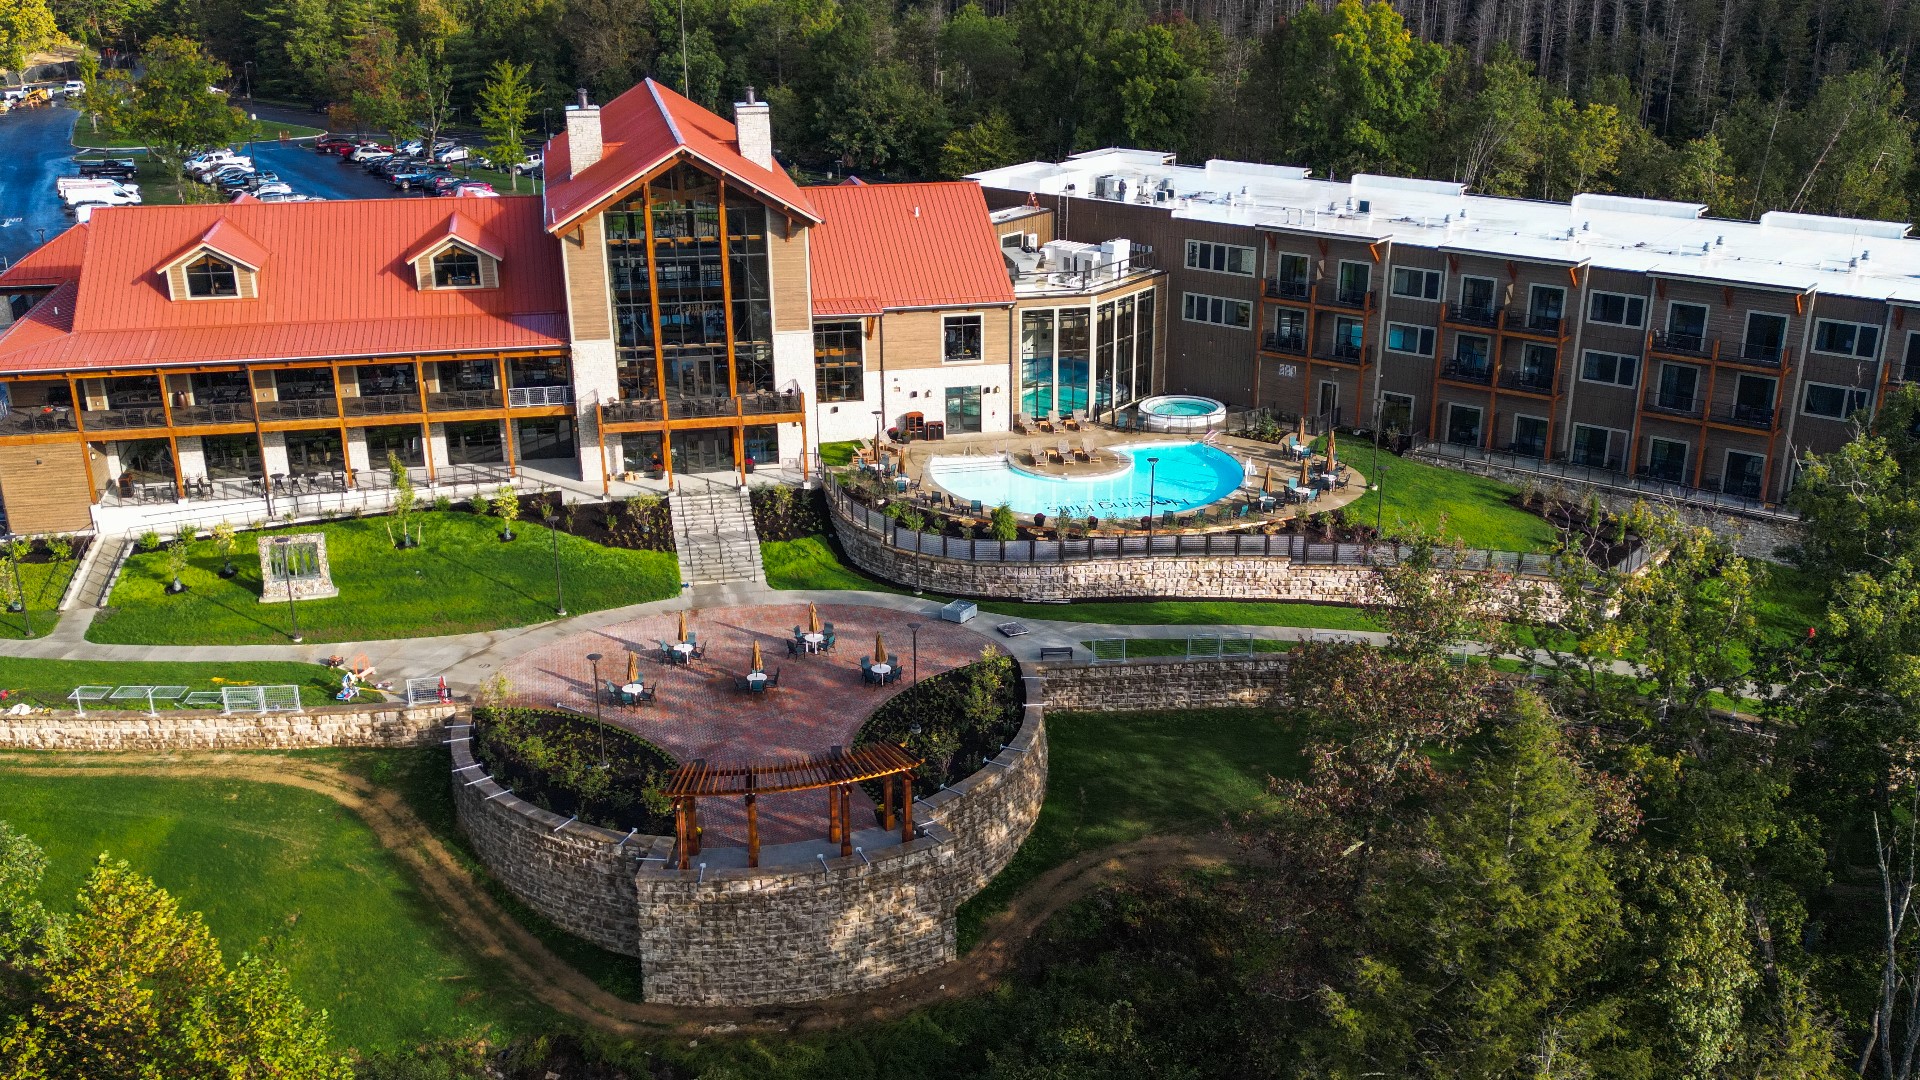 The Hocking Hills State Park Lodge and Conference Center features 81 rooms for guests to stay in, a restaurant, grab-and-go café, pools and more.